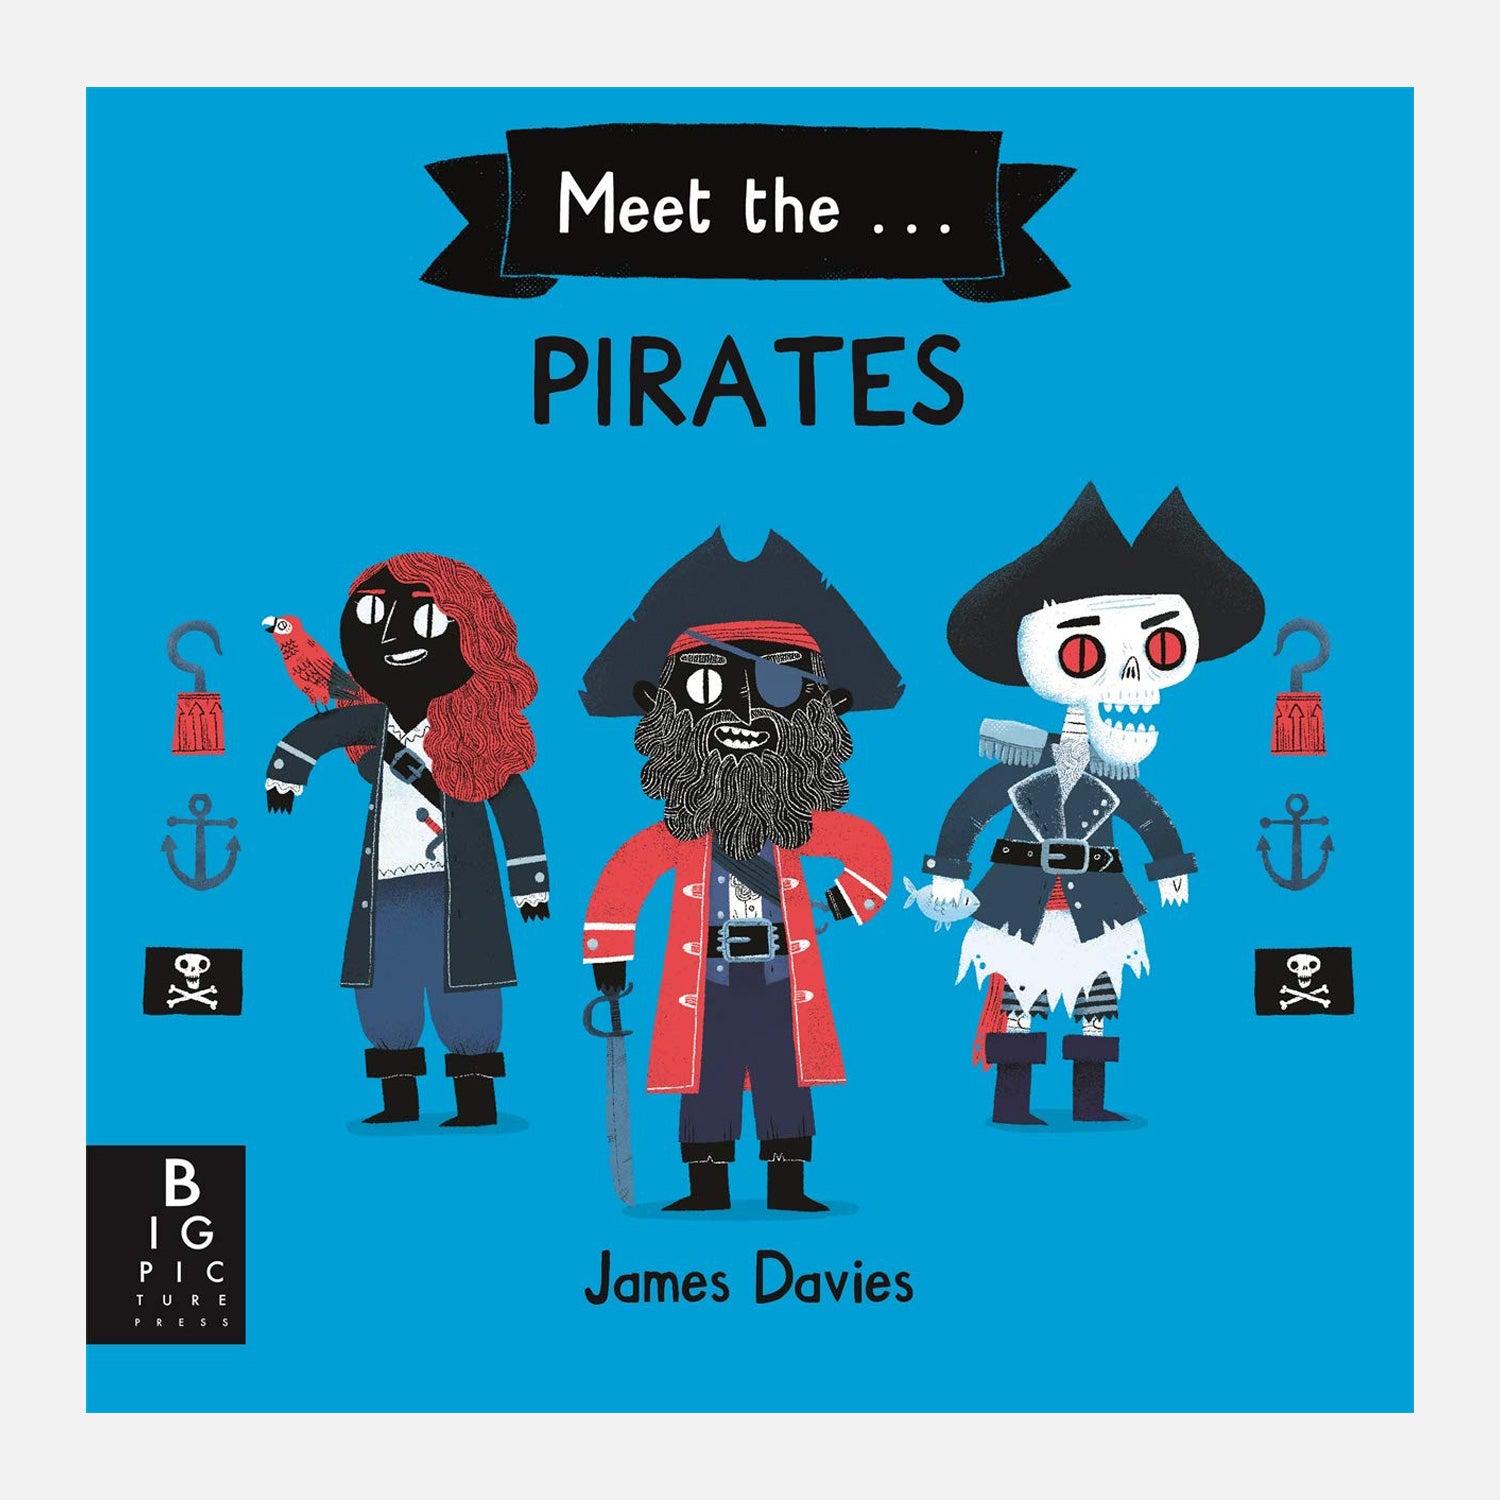 Meet the Pirates blue cover with three pirate characters on the cover